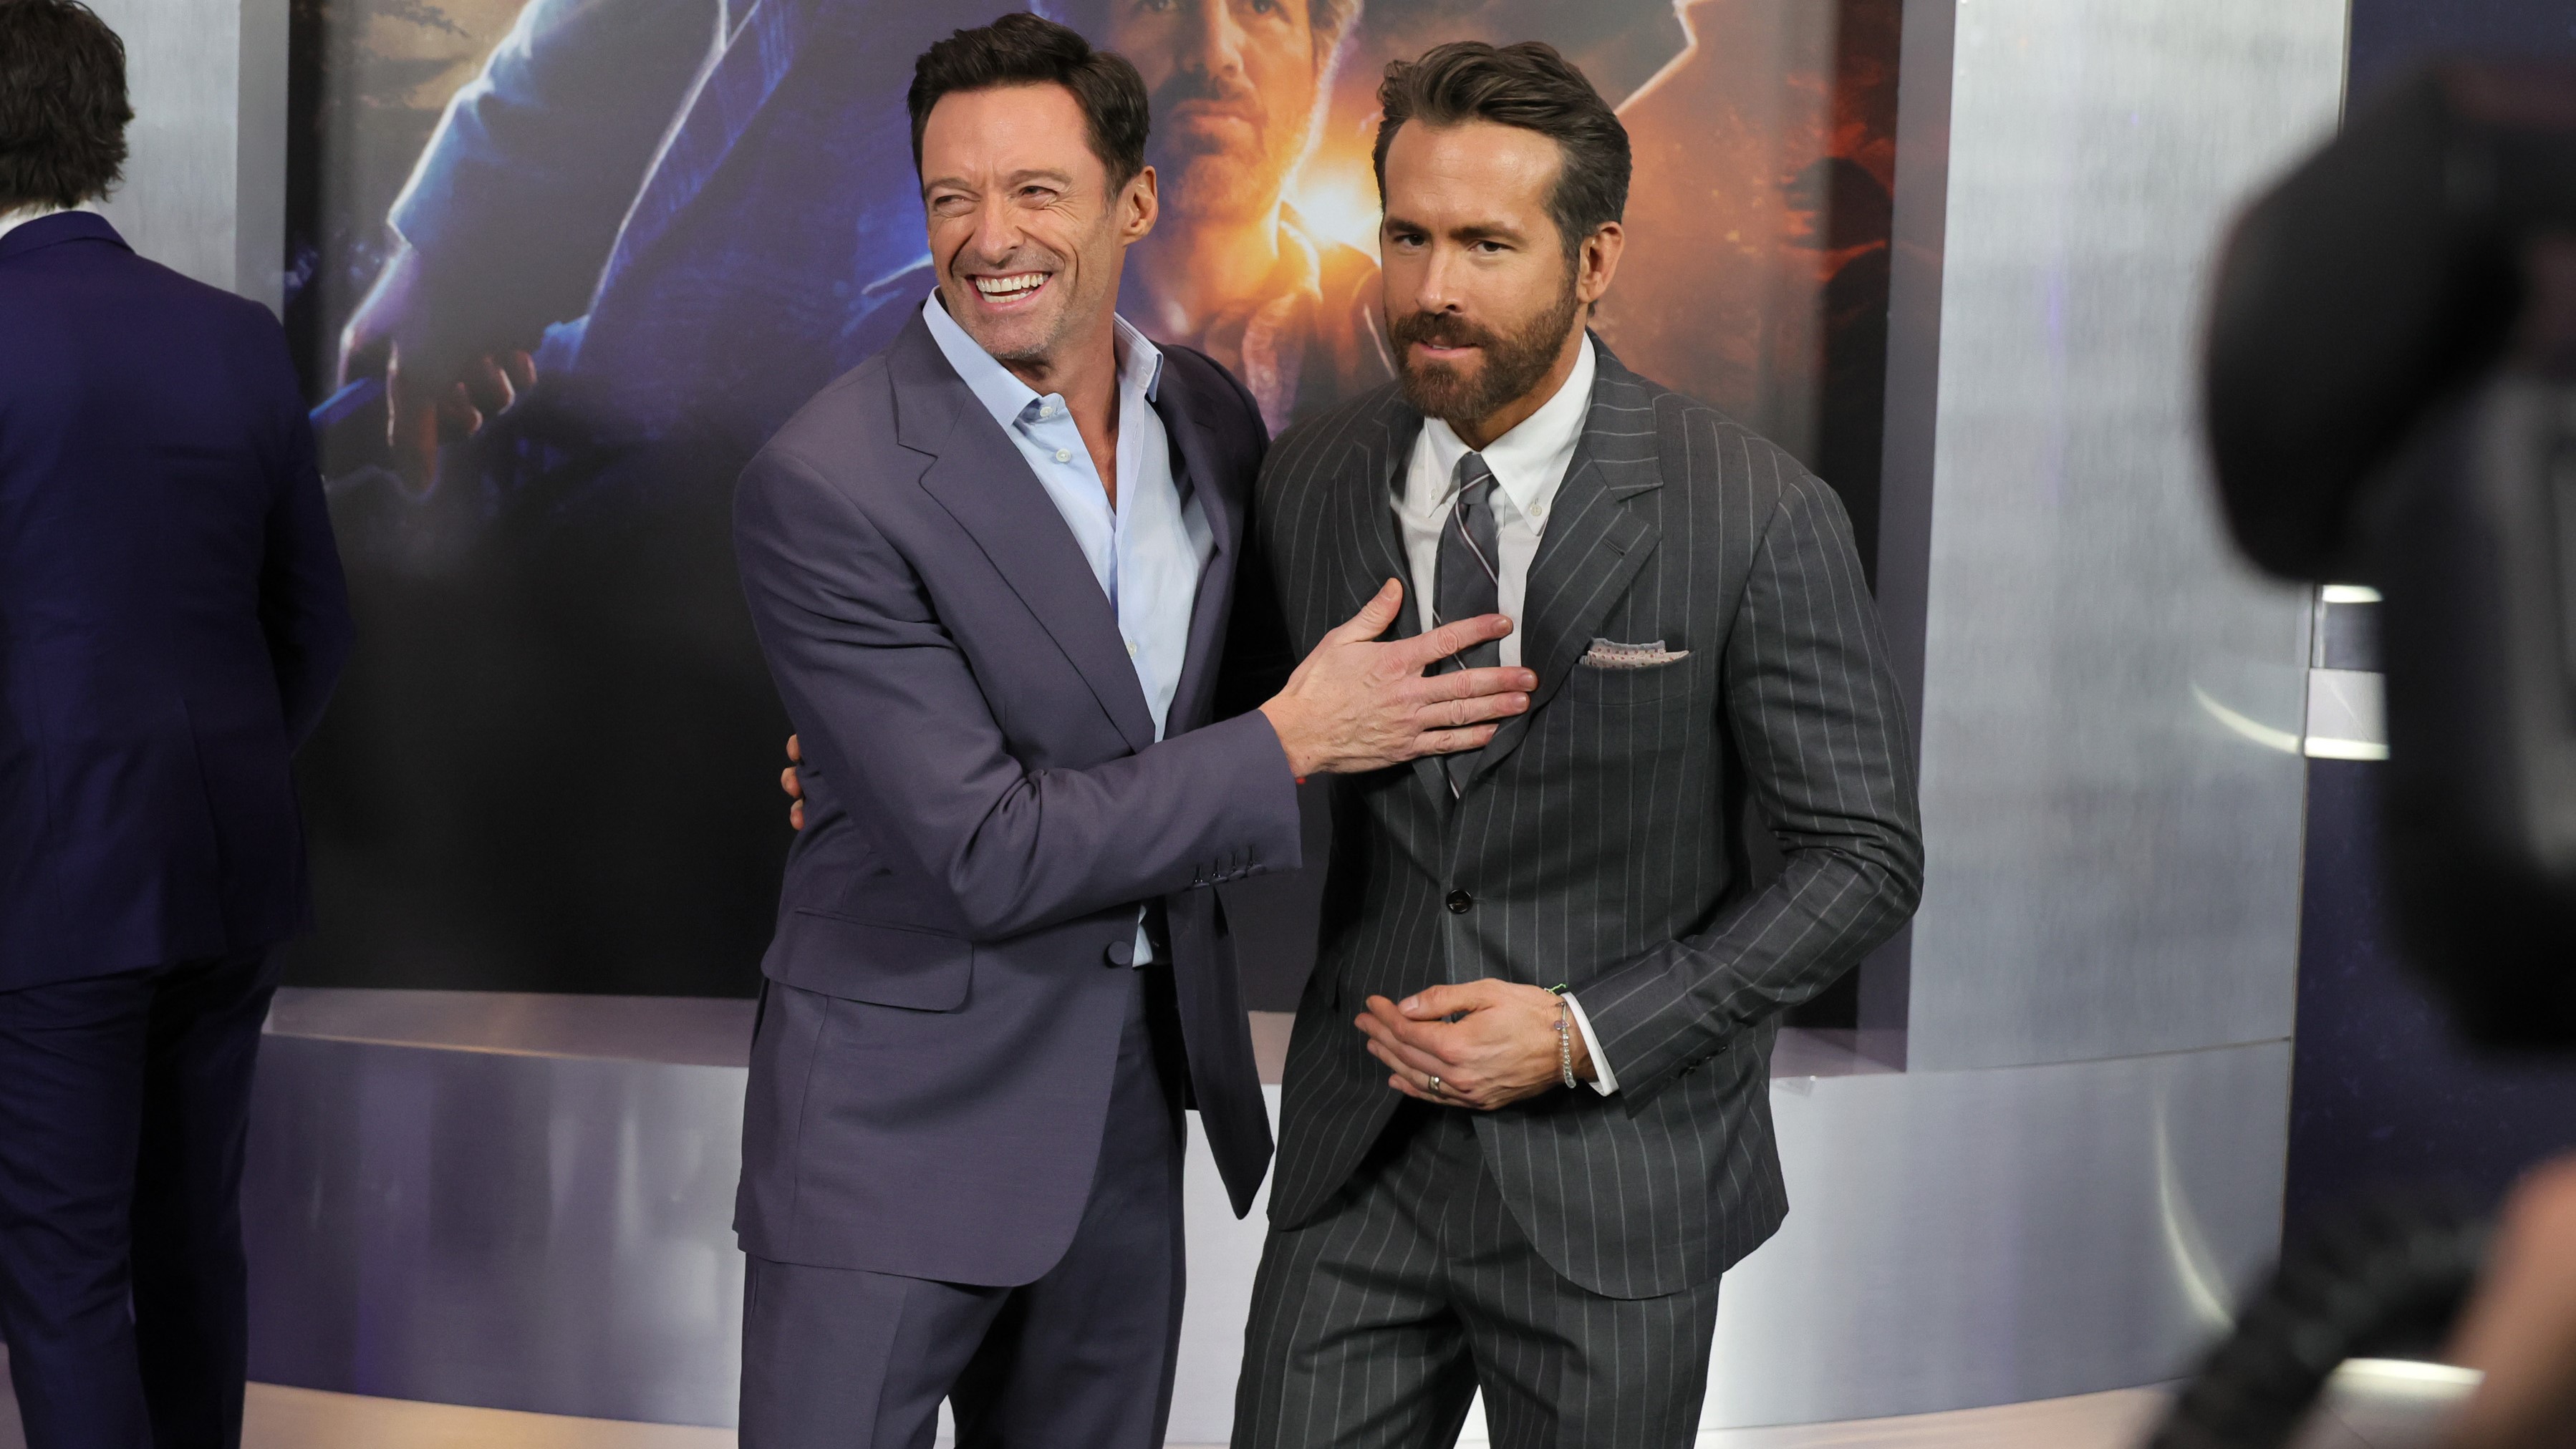 Ryan Reynolds News, In-Depth Articles, Pictures & Videos